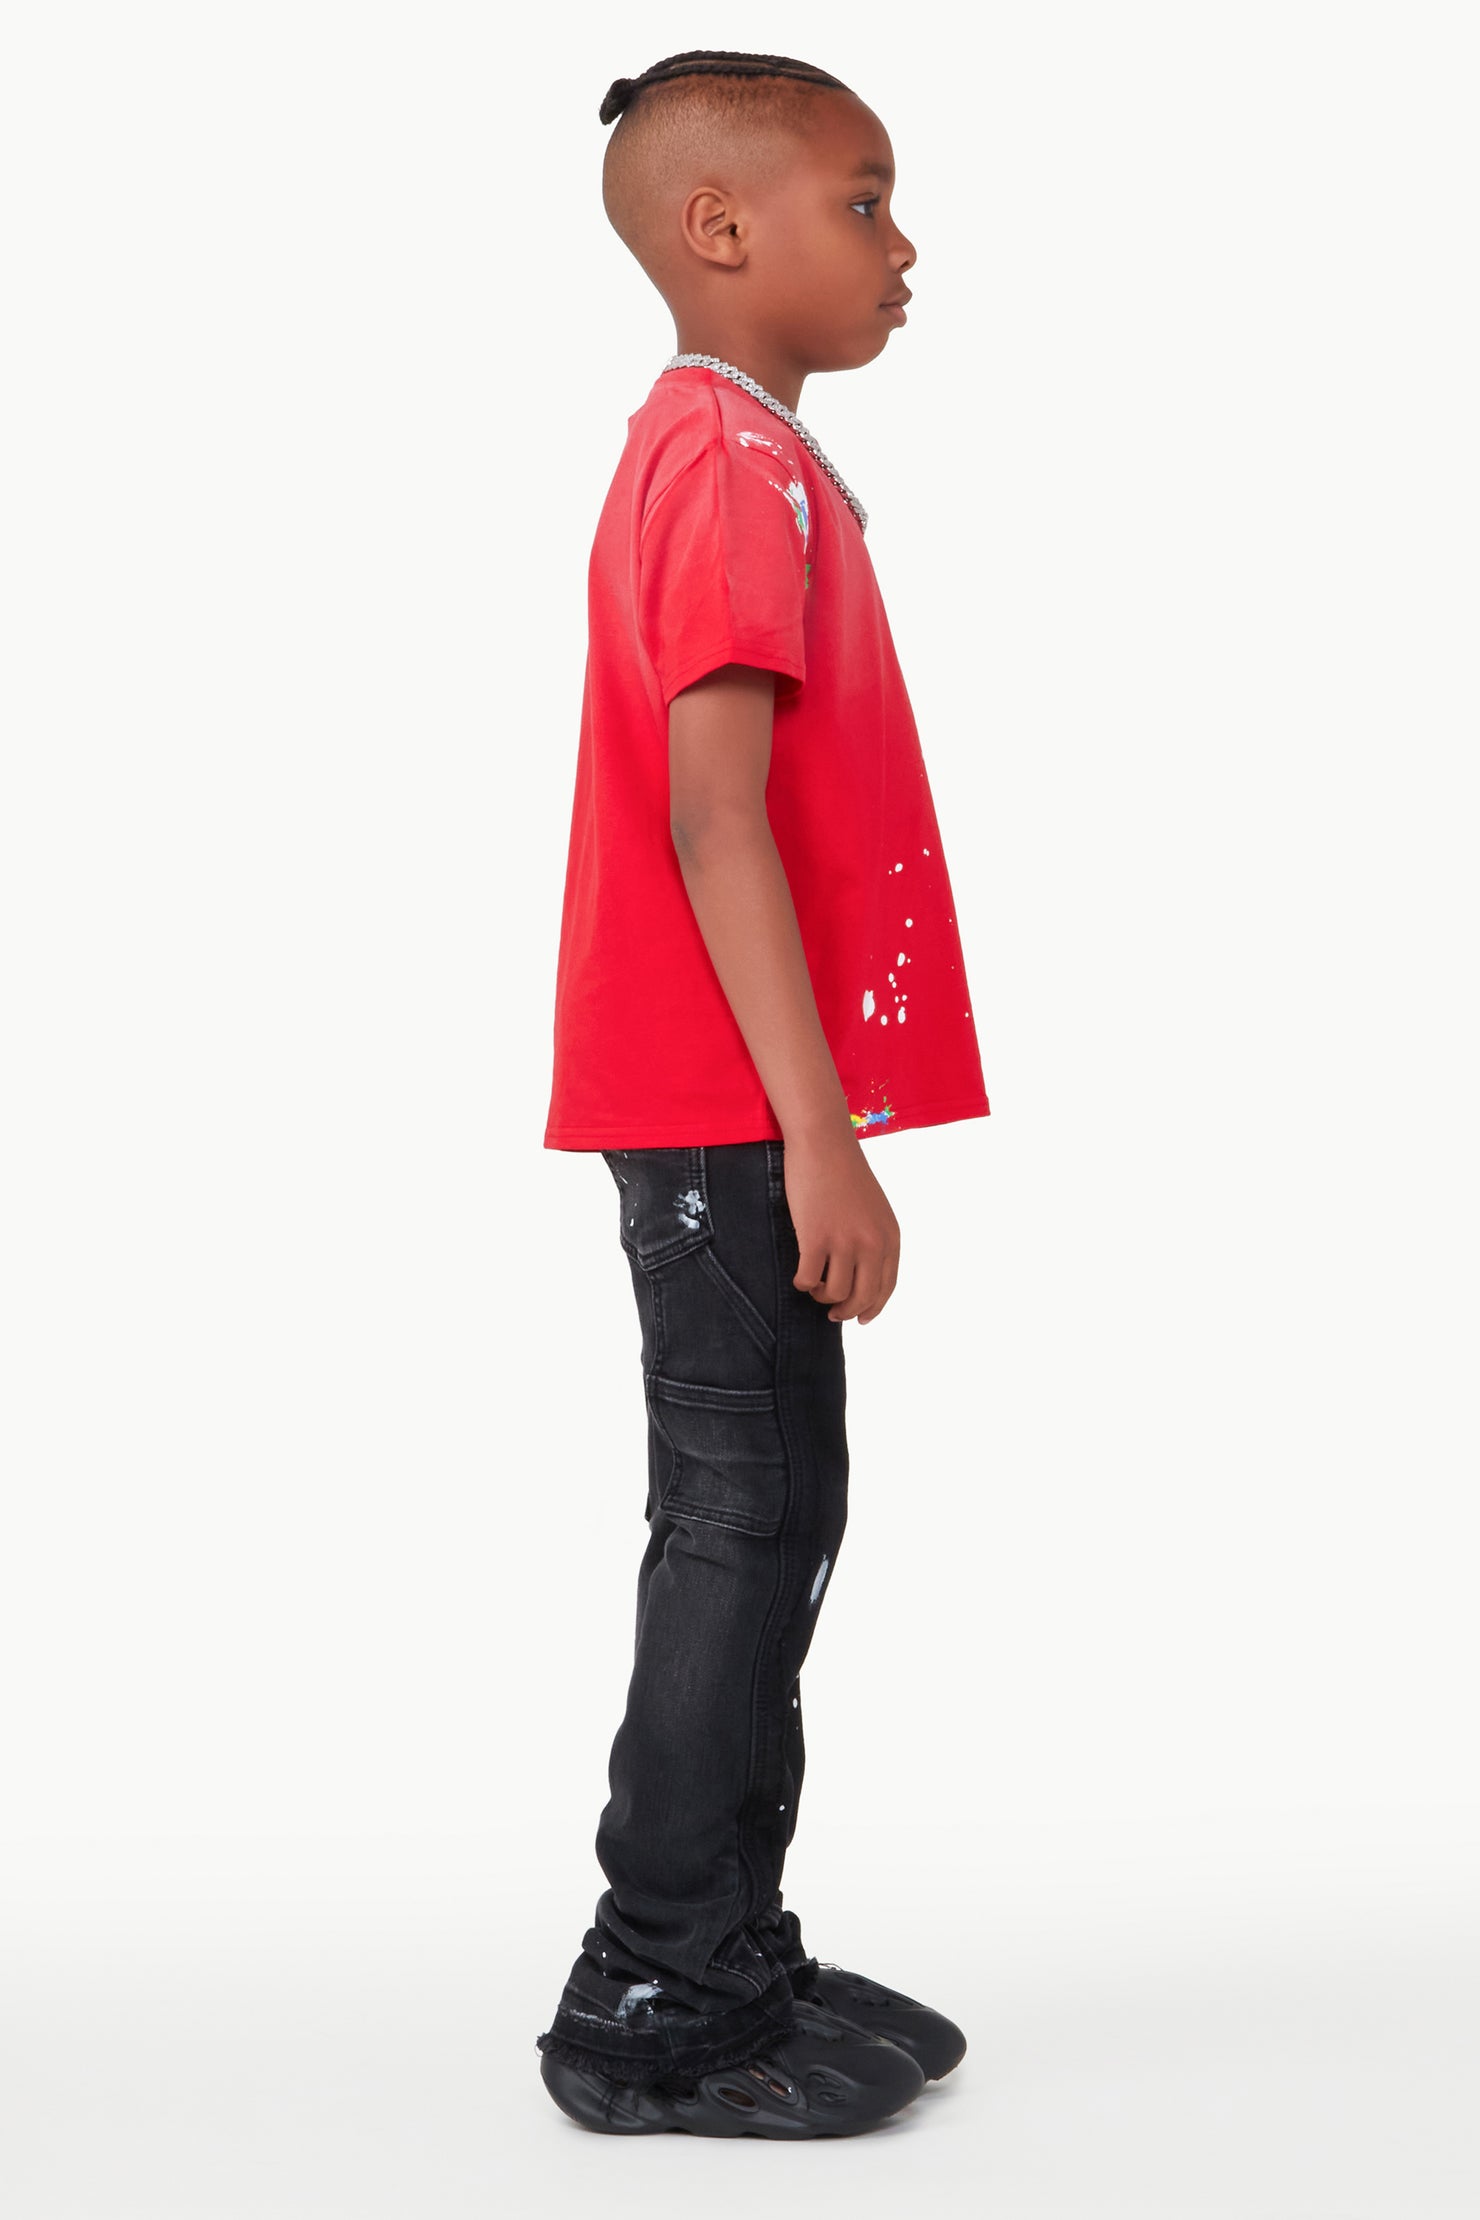 Boys Art Dist Red T-shirt/Stacked Flare Jean Set